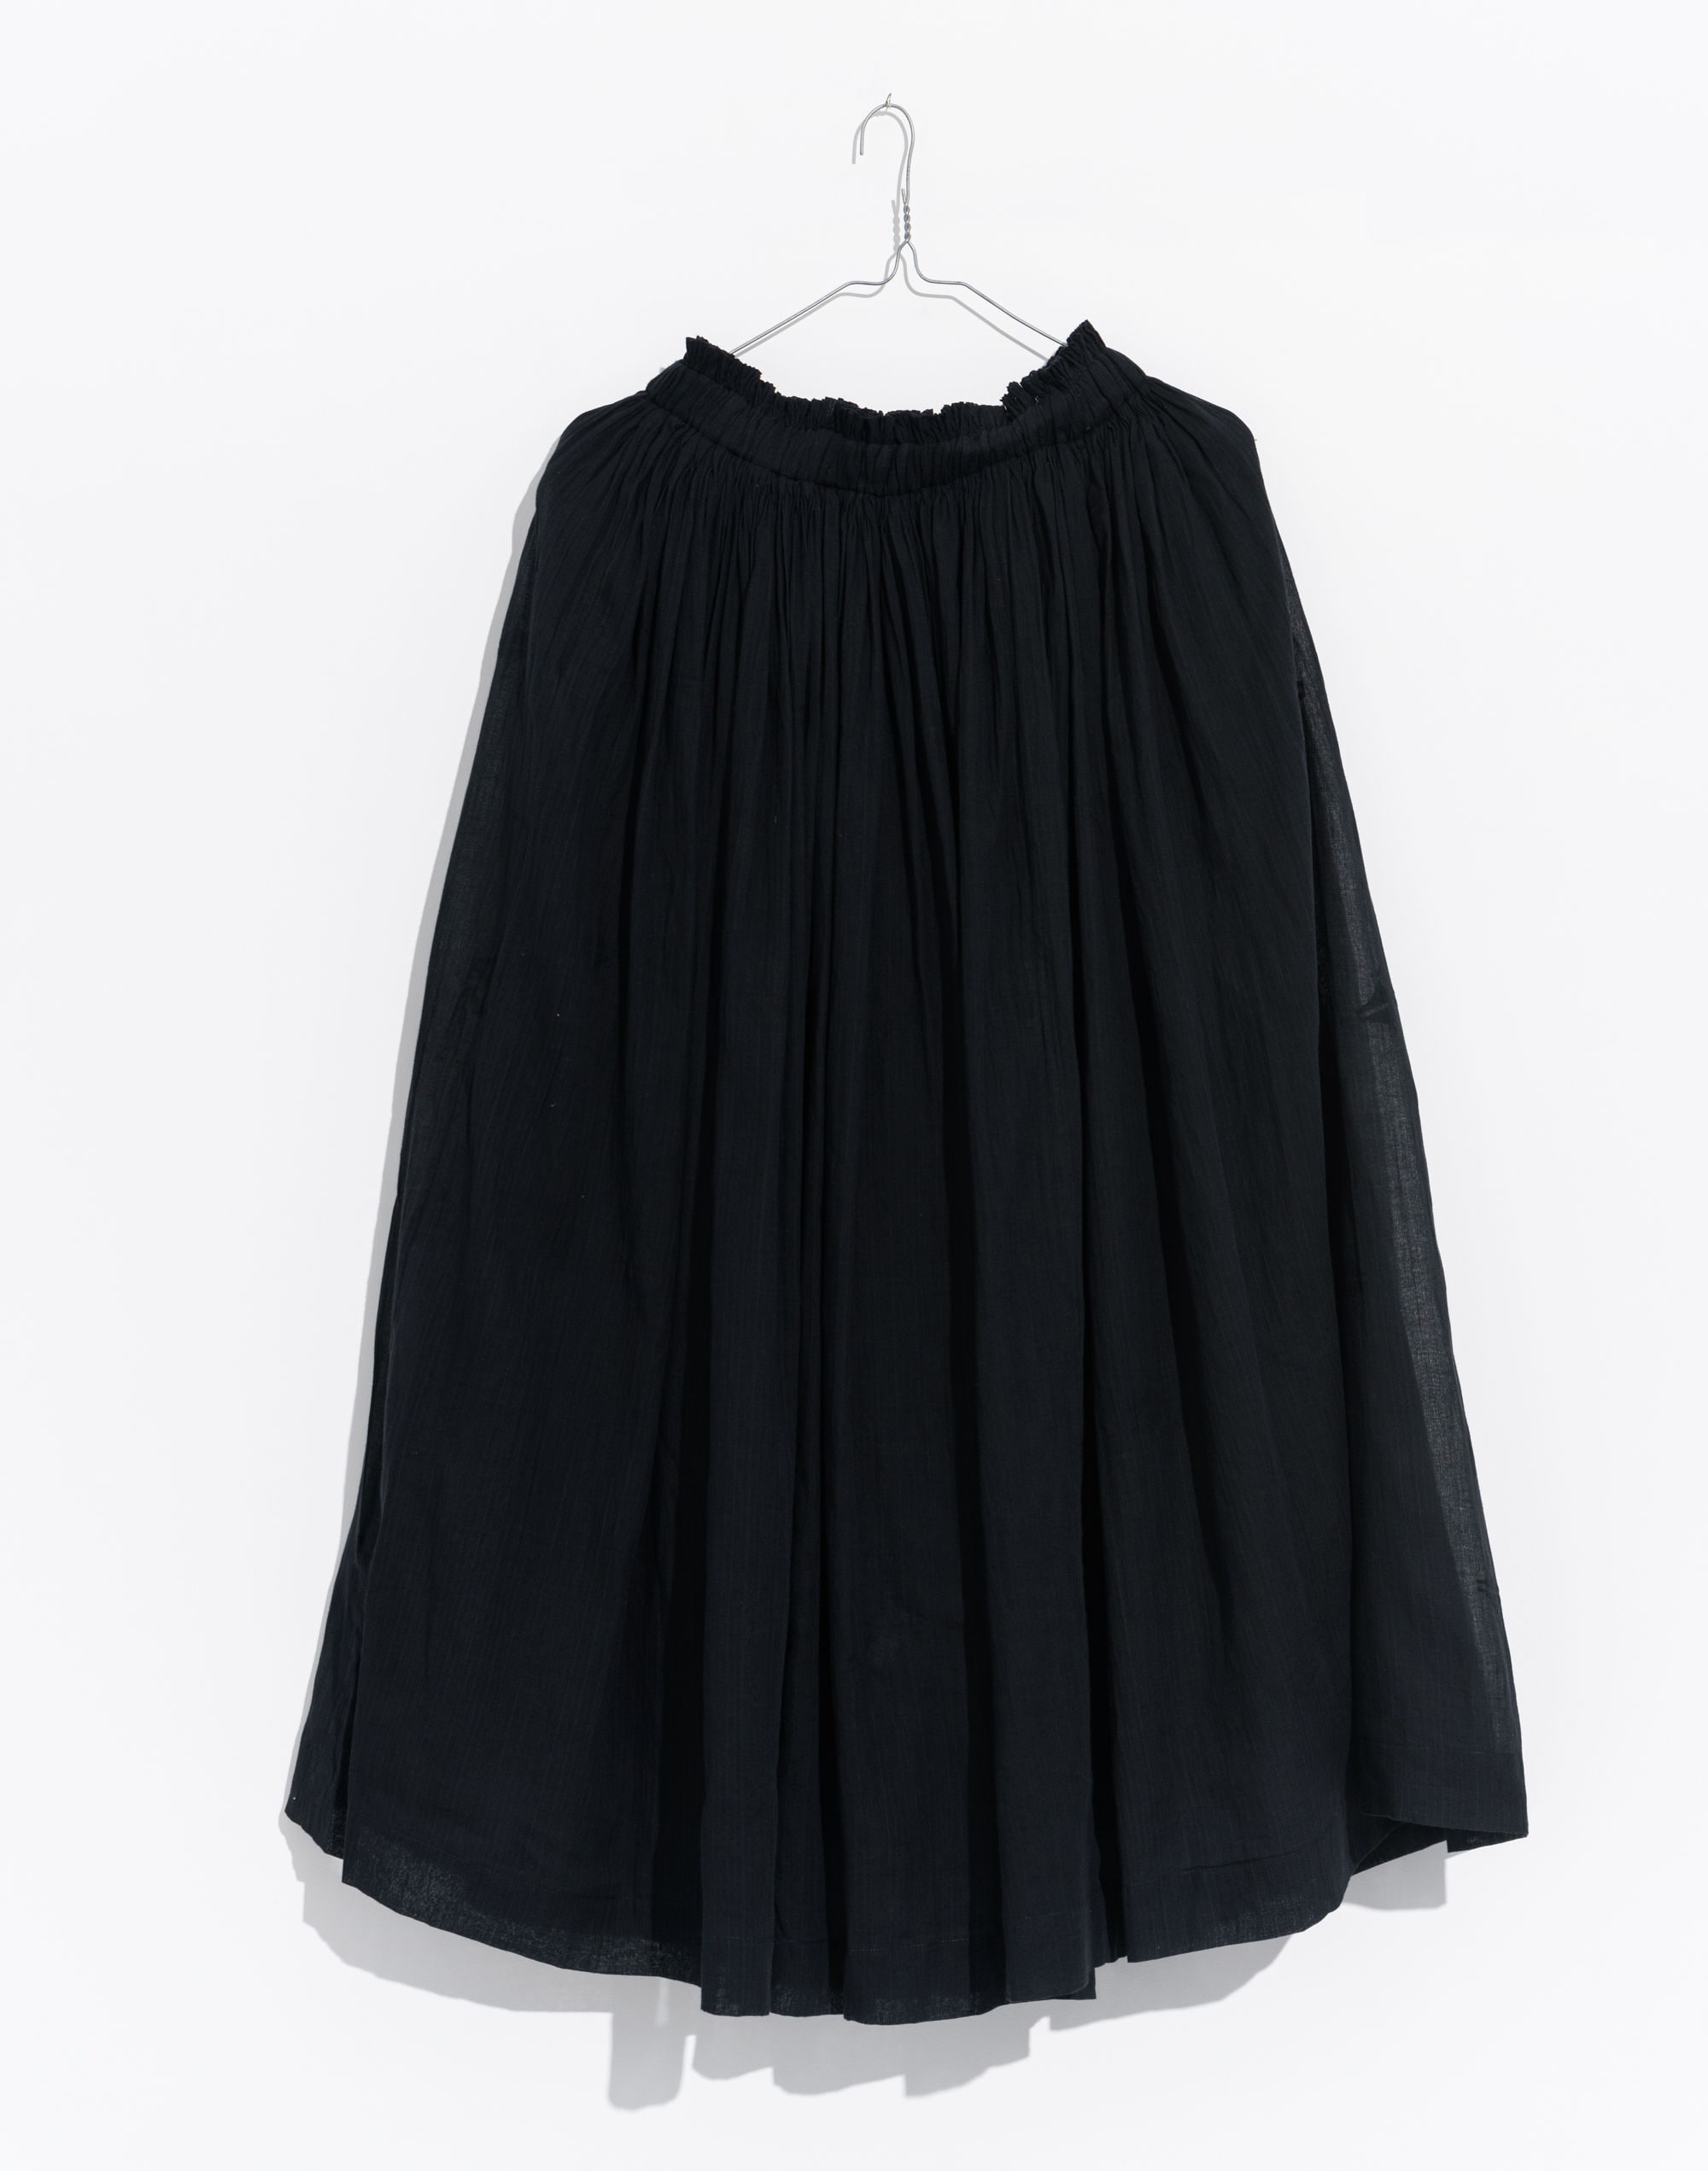 World of Crow Classic black pull-on skirt